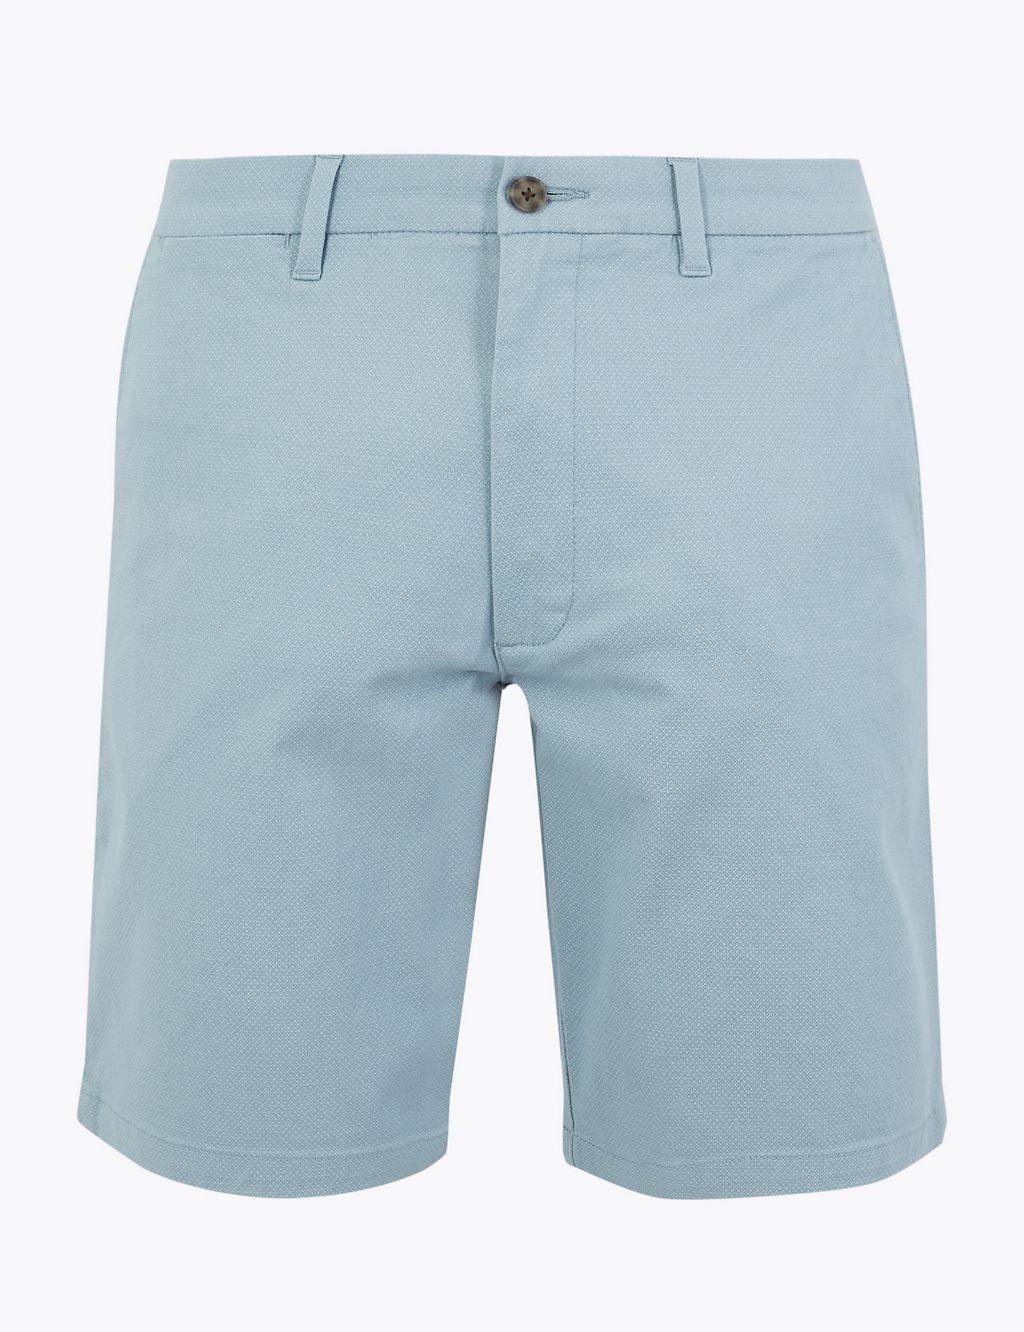 Stretch Printed Chino Shorts | M&S Collection | M&S